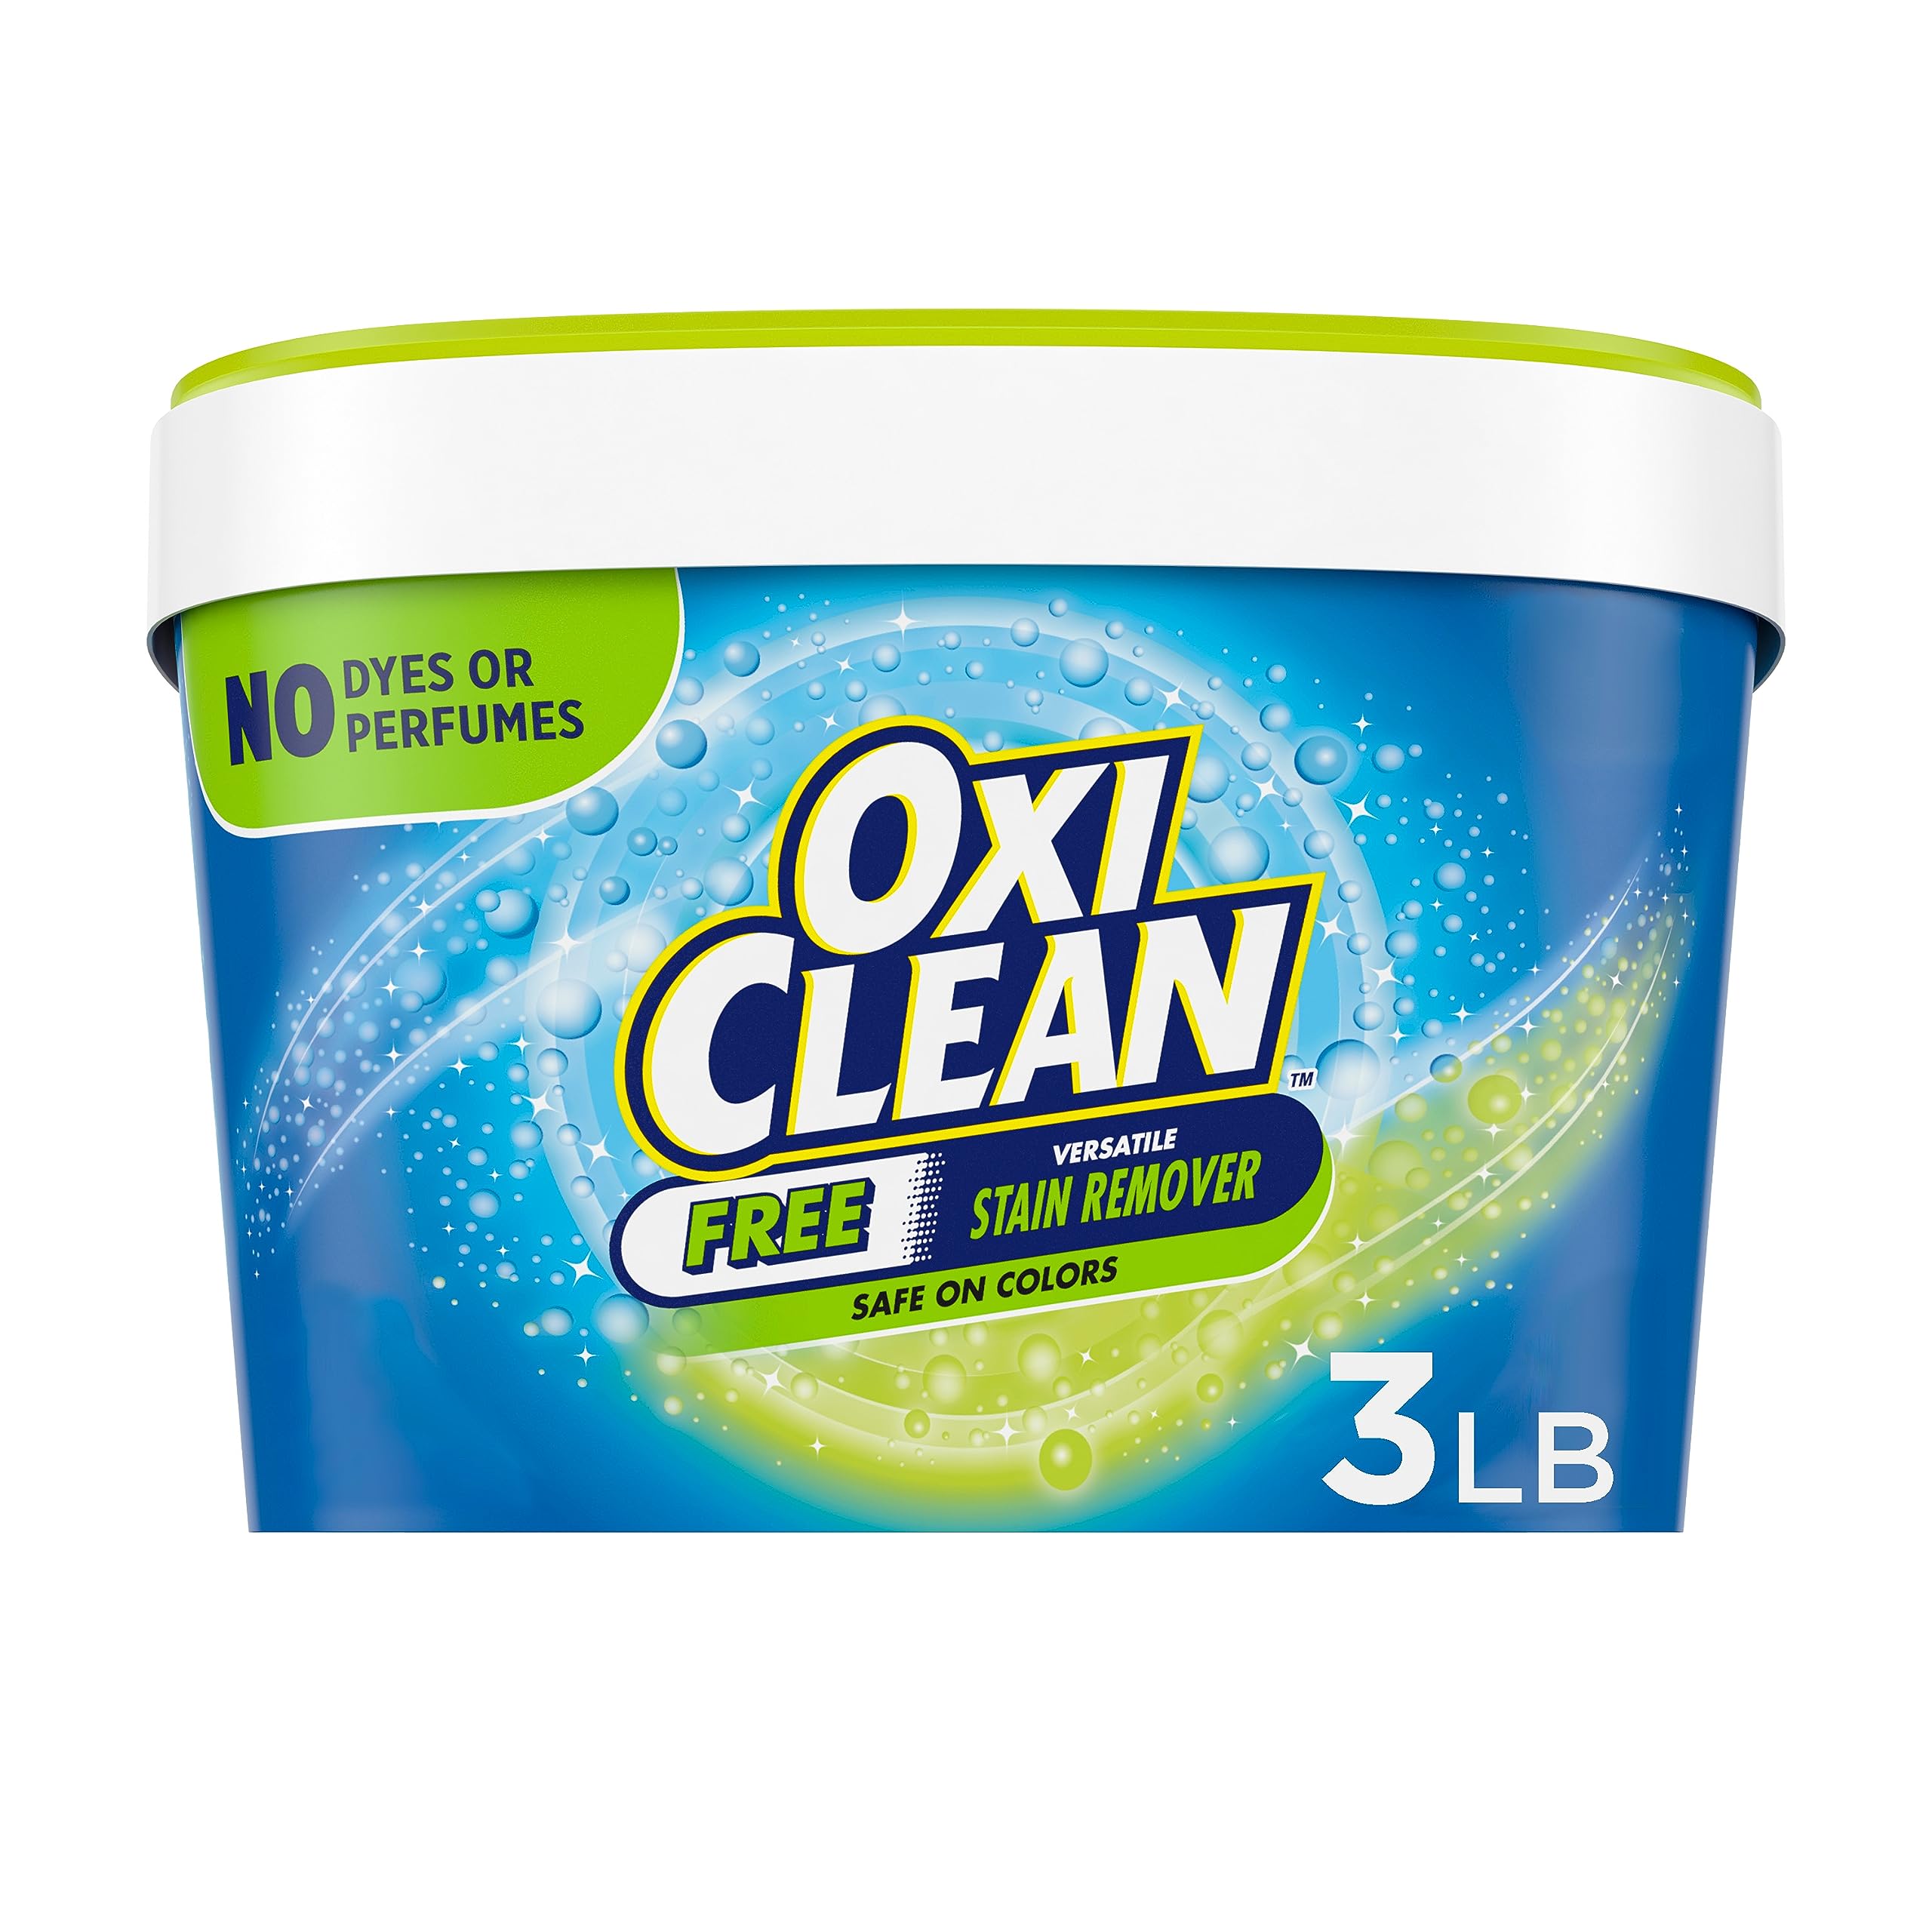 OxiClean Free Versatile Stain Remover Powder 4 containers for $24,87 $24.87